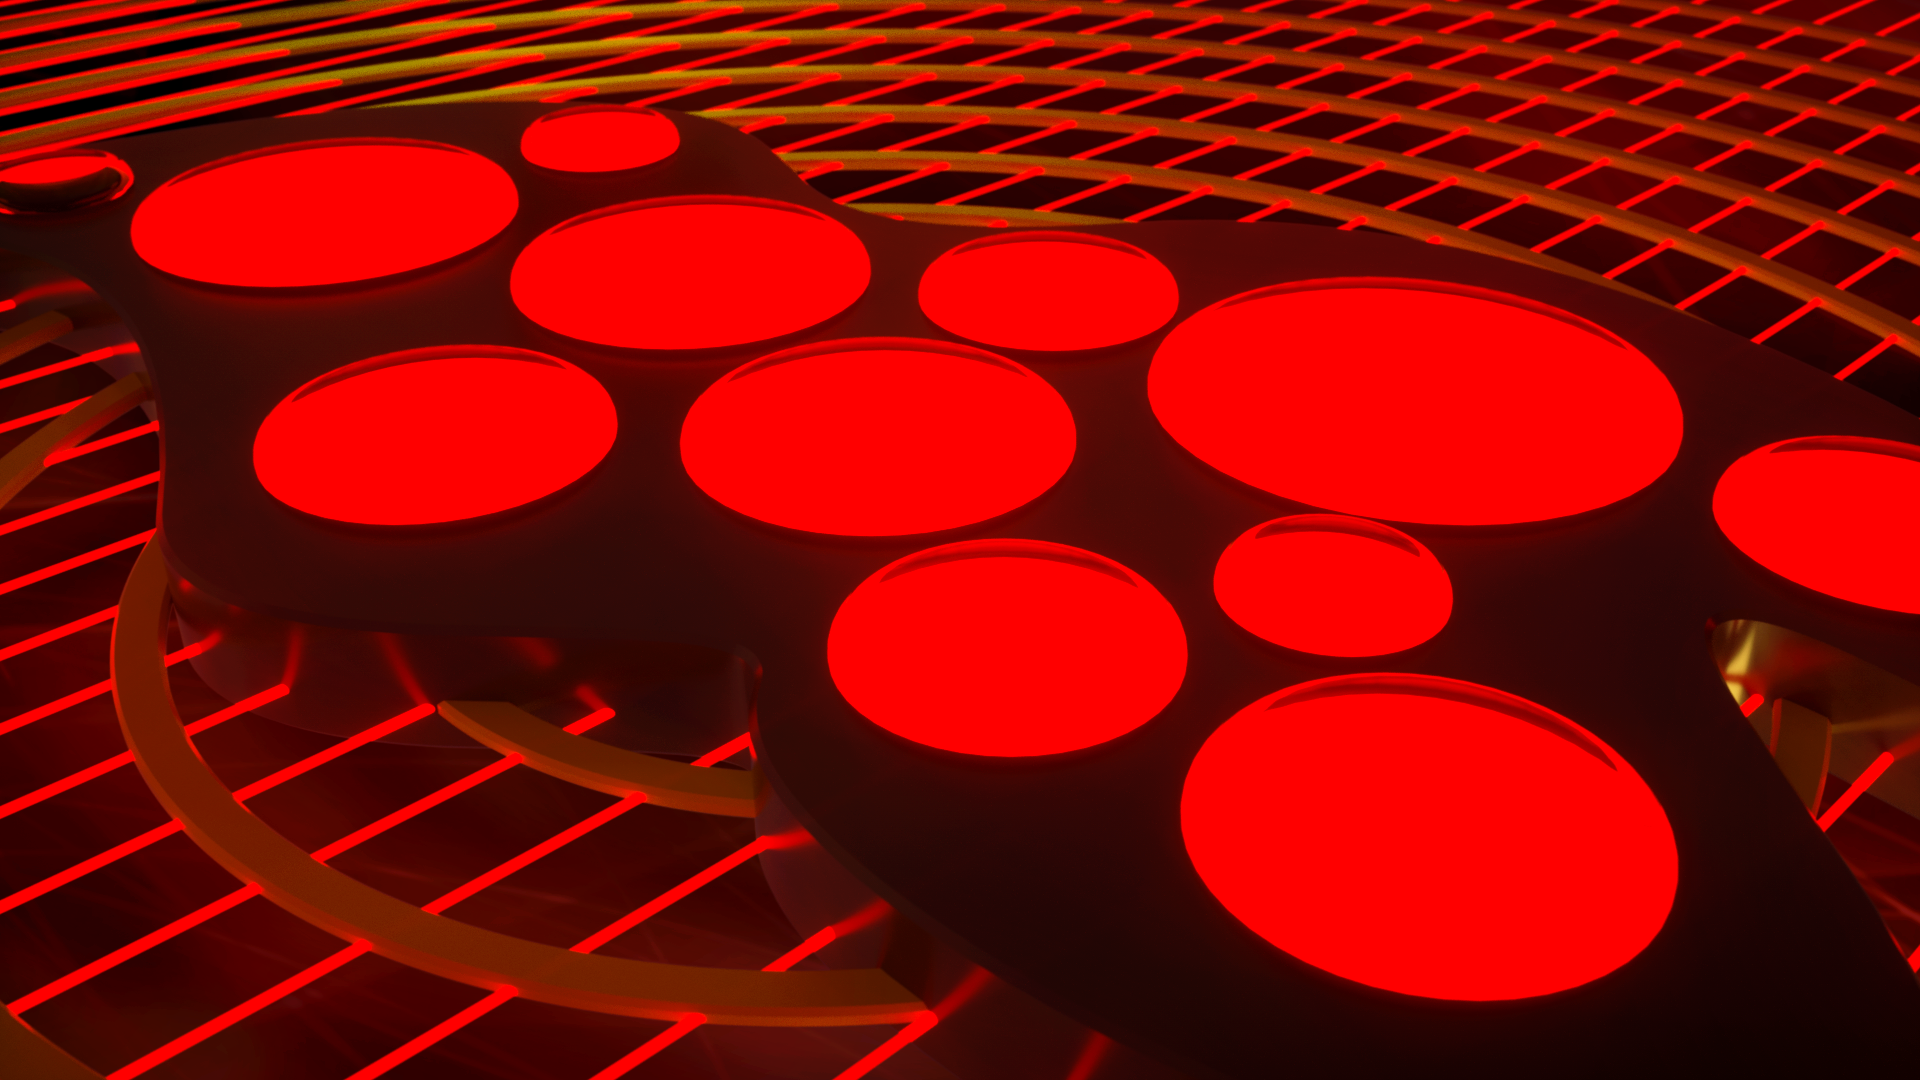 Red Glowing Neon Shapes Geometry Circle Abstract 3D Abstract Grid Line Art 1920x1080